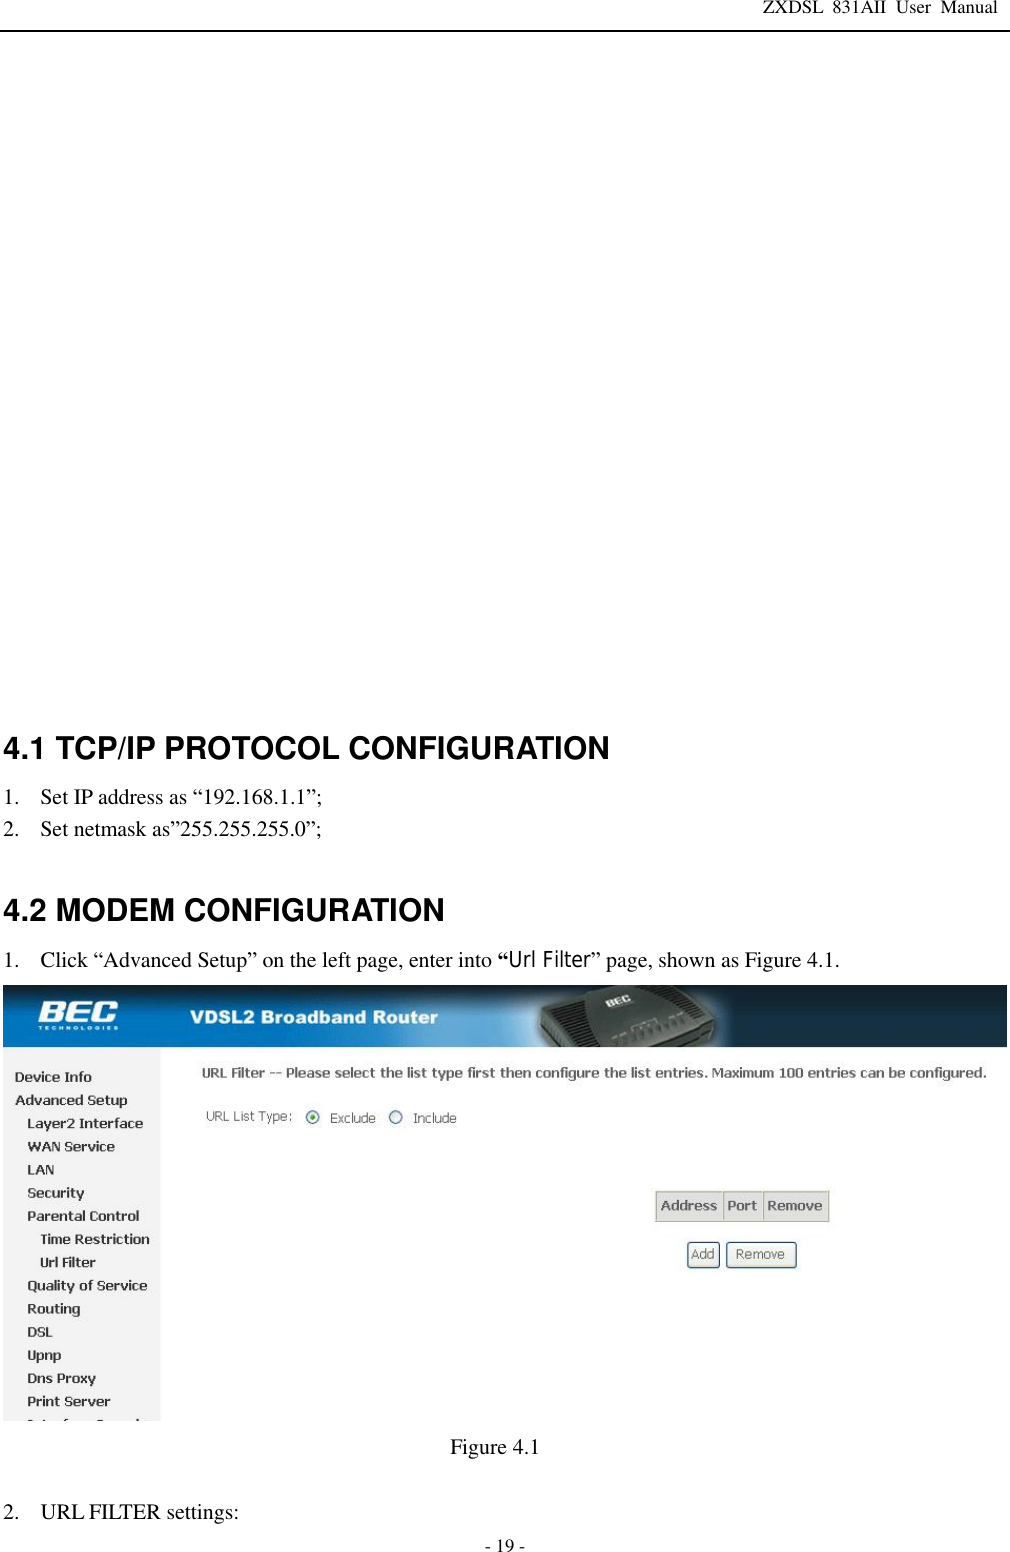 ZXDSL 831AII User Manual  - 19 -                     4.1 TCP/IP PROTOCOL CONFIGURATION 1. Set IP address as “192.168.1.1”; 2. Set netmask as”255.255.255.0”;  4.2 MODEM CONFIGURATION 1. Click “Advanced Setup” on the left page, enter into “Url Filter” page, shown as Figure 4.1.  Figure 4.1  2. URL FILTER settings: 